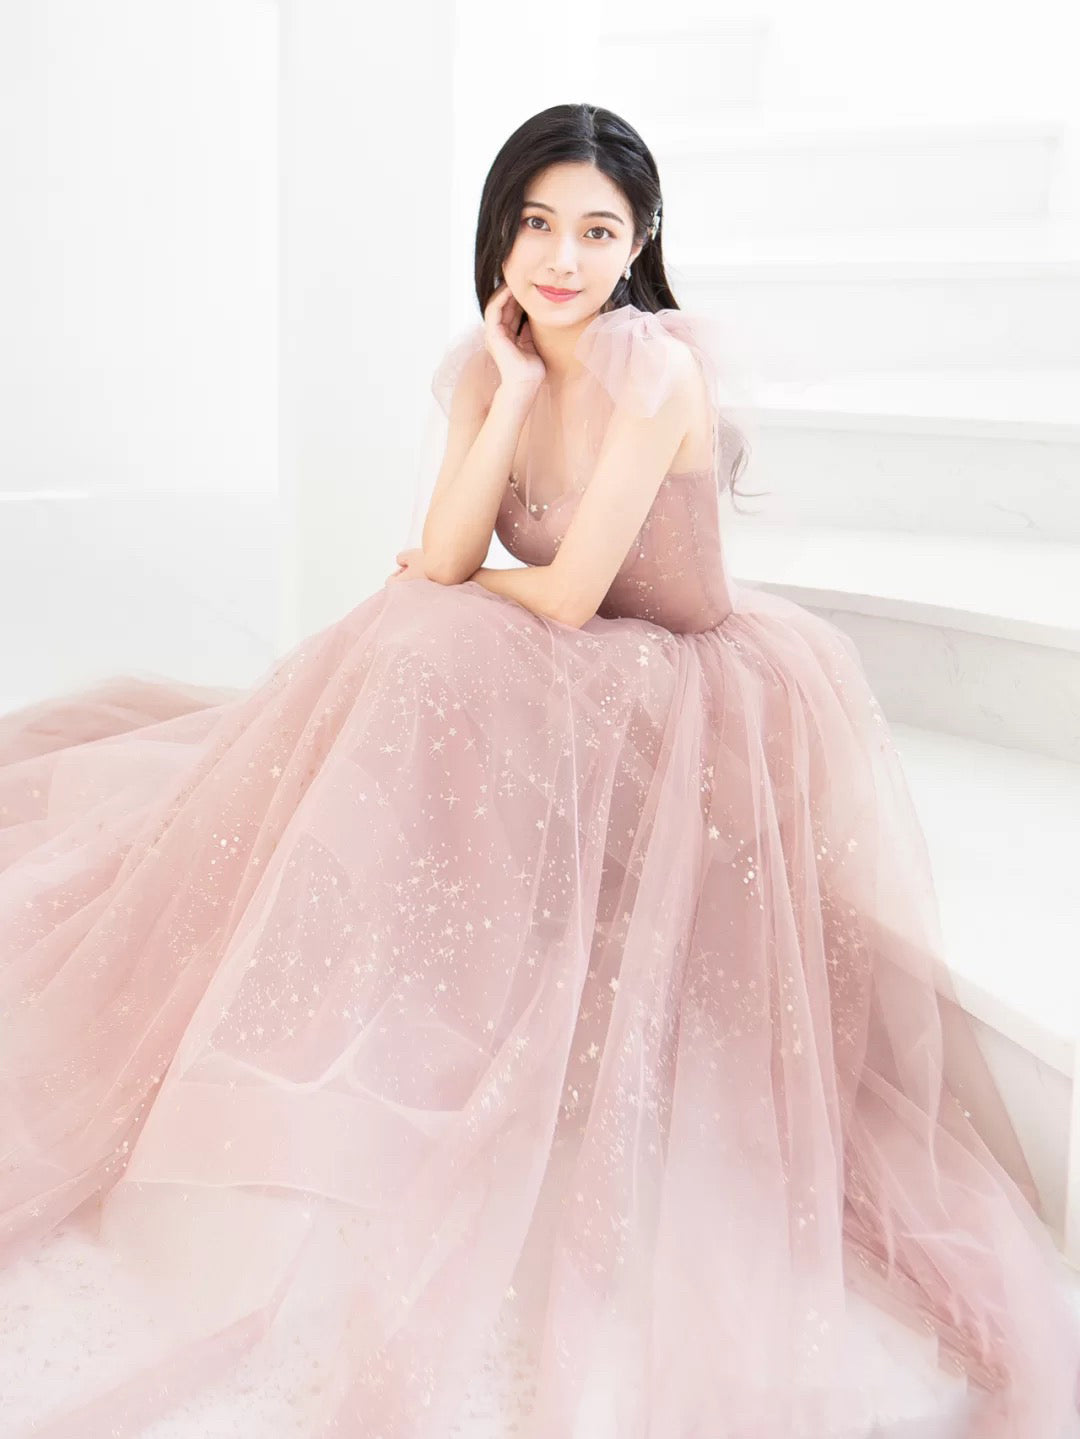 Bean pink tulle long prom dress, A line tulle formal evening dress